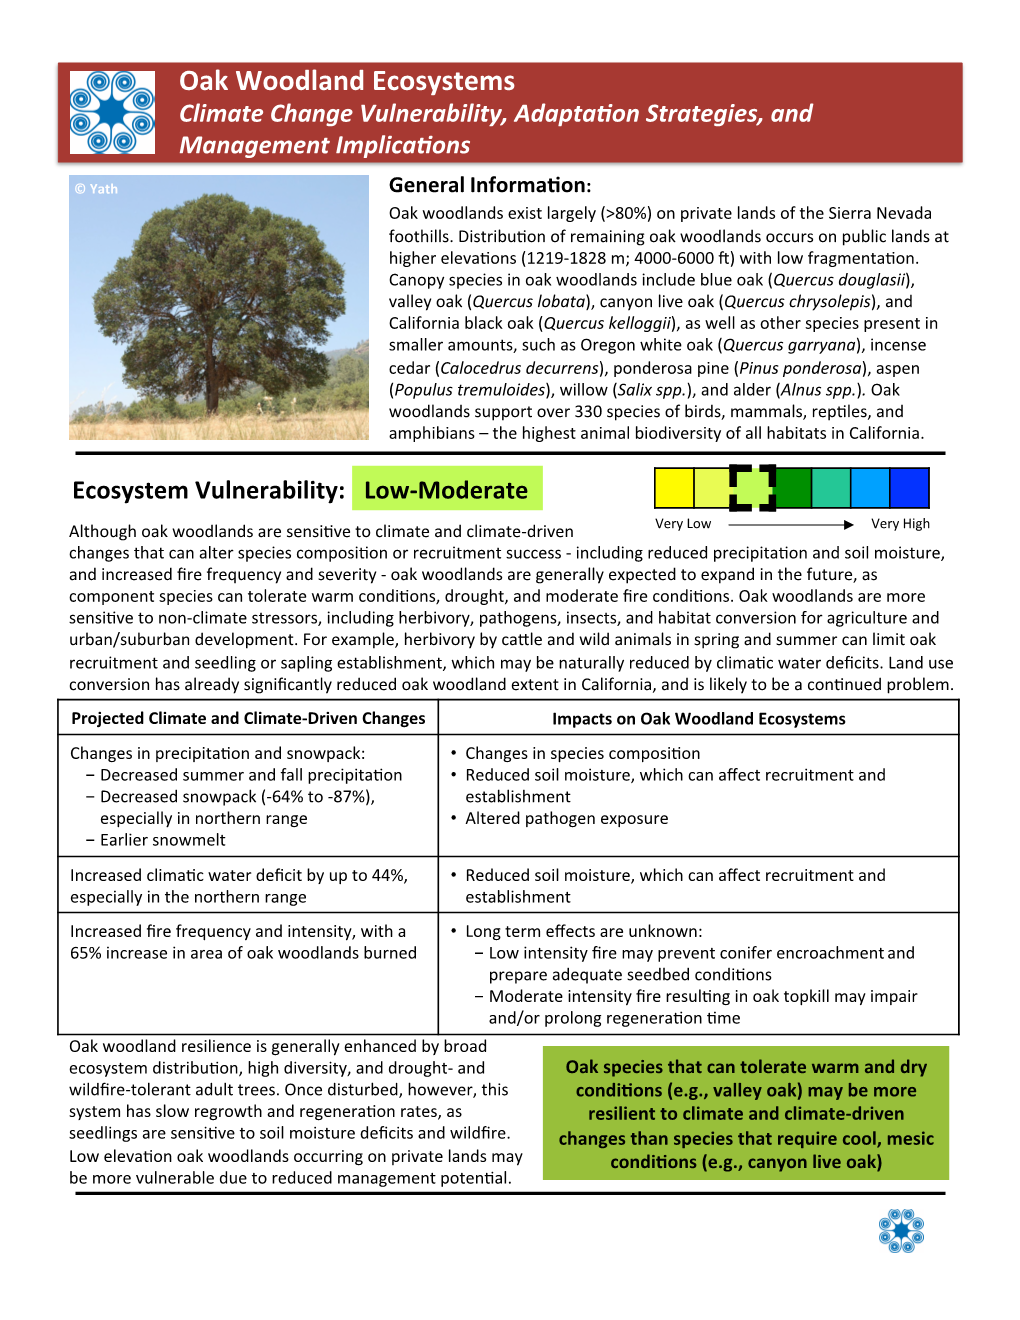 Oak Woodland Ecosystems Climate Change Vulnerability, Adapta�On Strategies, and Management Implica�Ons